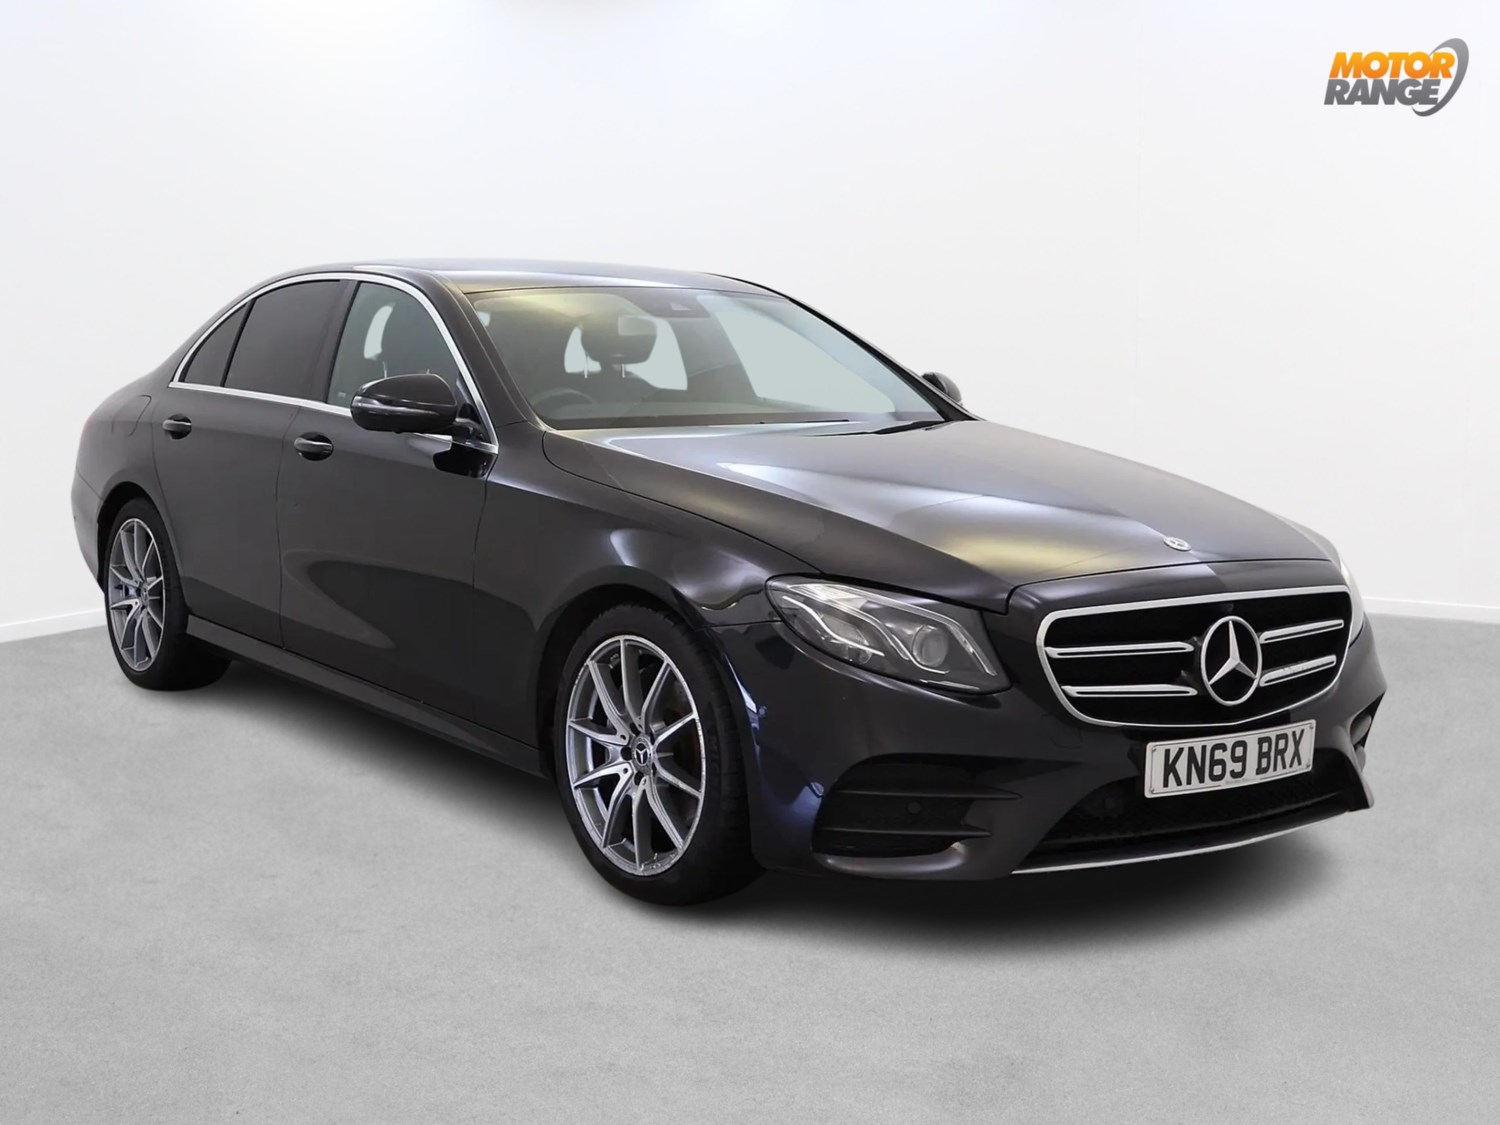 2020 used Mercedes-Benz E Class E220d AMG Line Edition 4dr 9G-Tronic